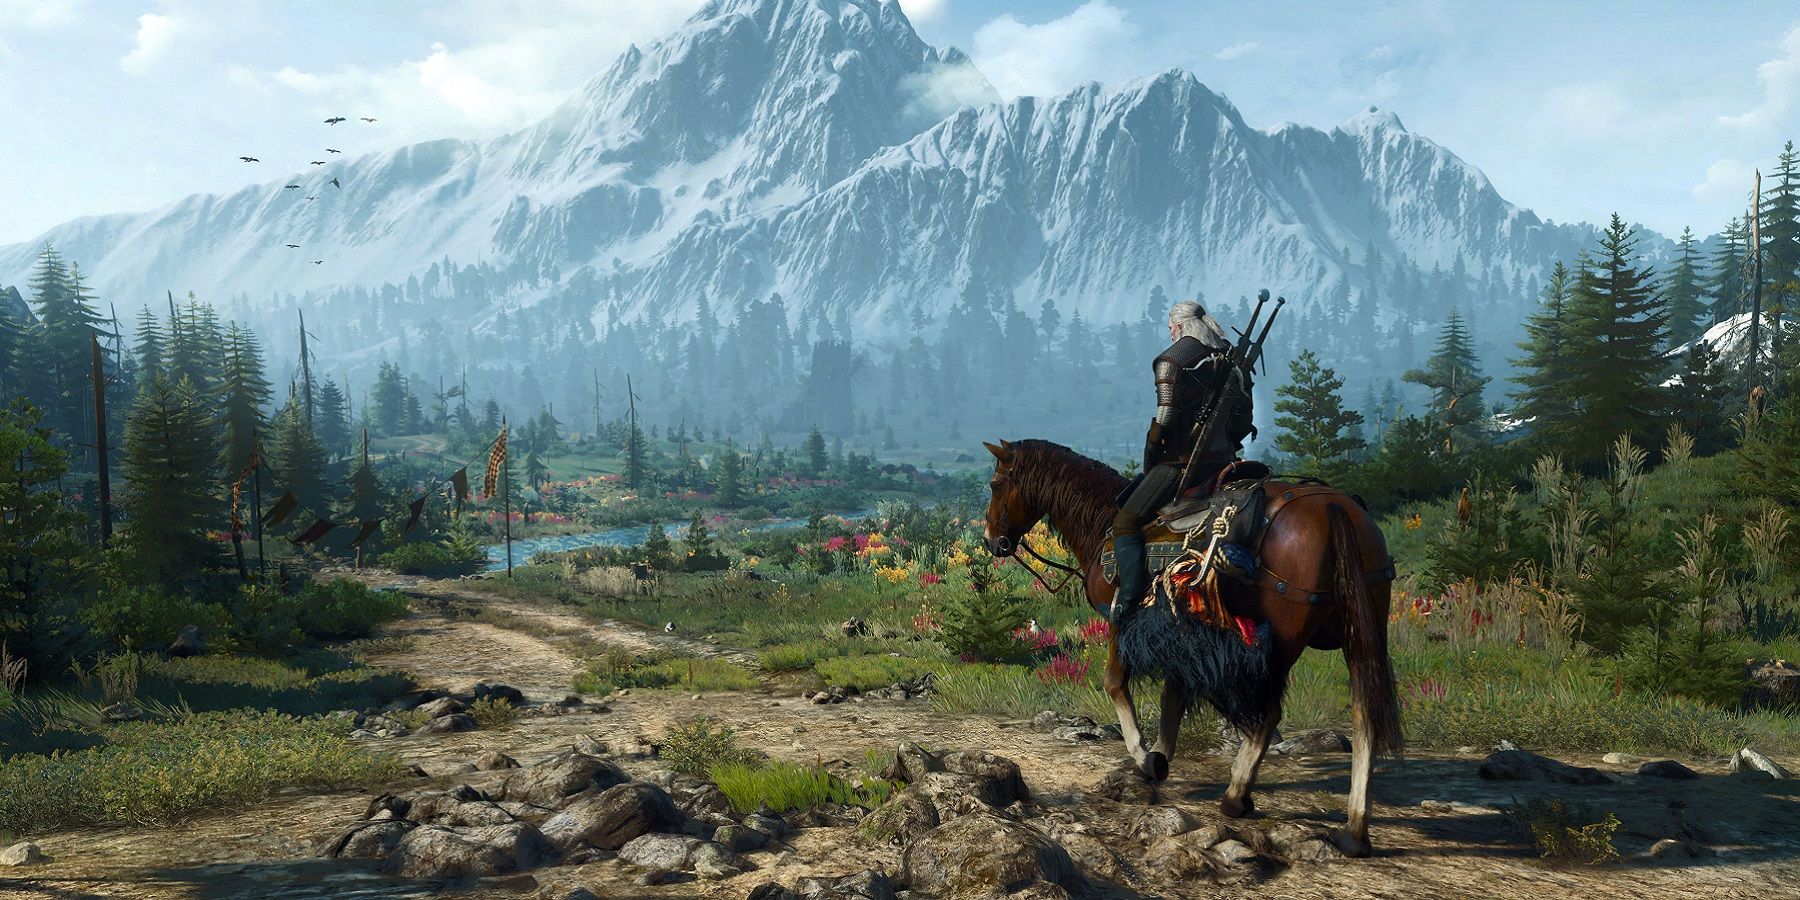 Image from The Witcher 3 showing Geralt looking towards a mountain in the far distance.